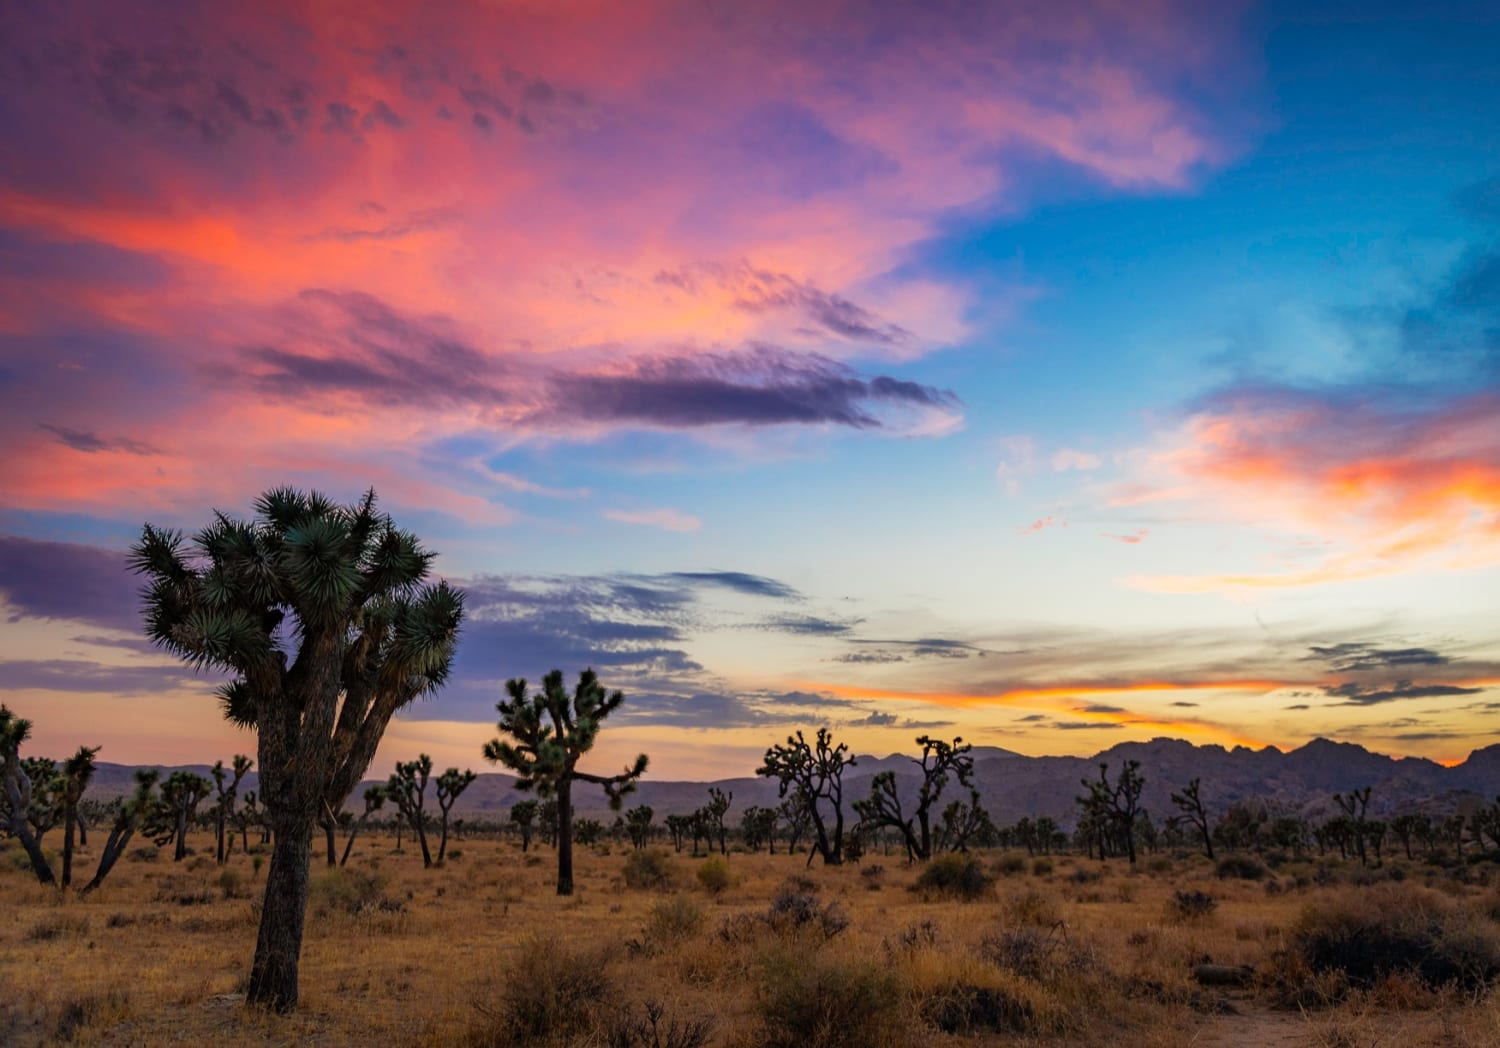 Rising above the parched desert plain, Joshua Trees lift their arms towards another gorgeous sunset